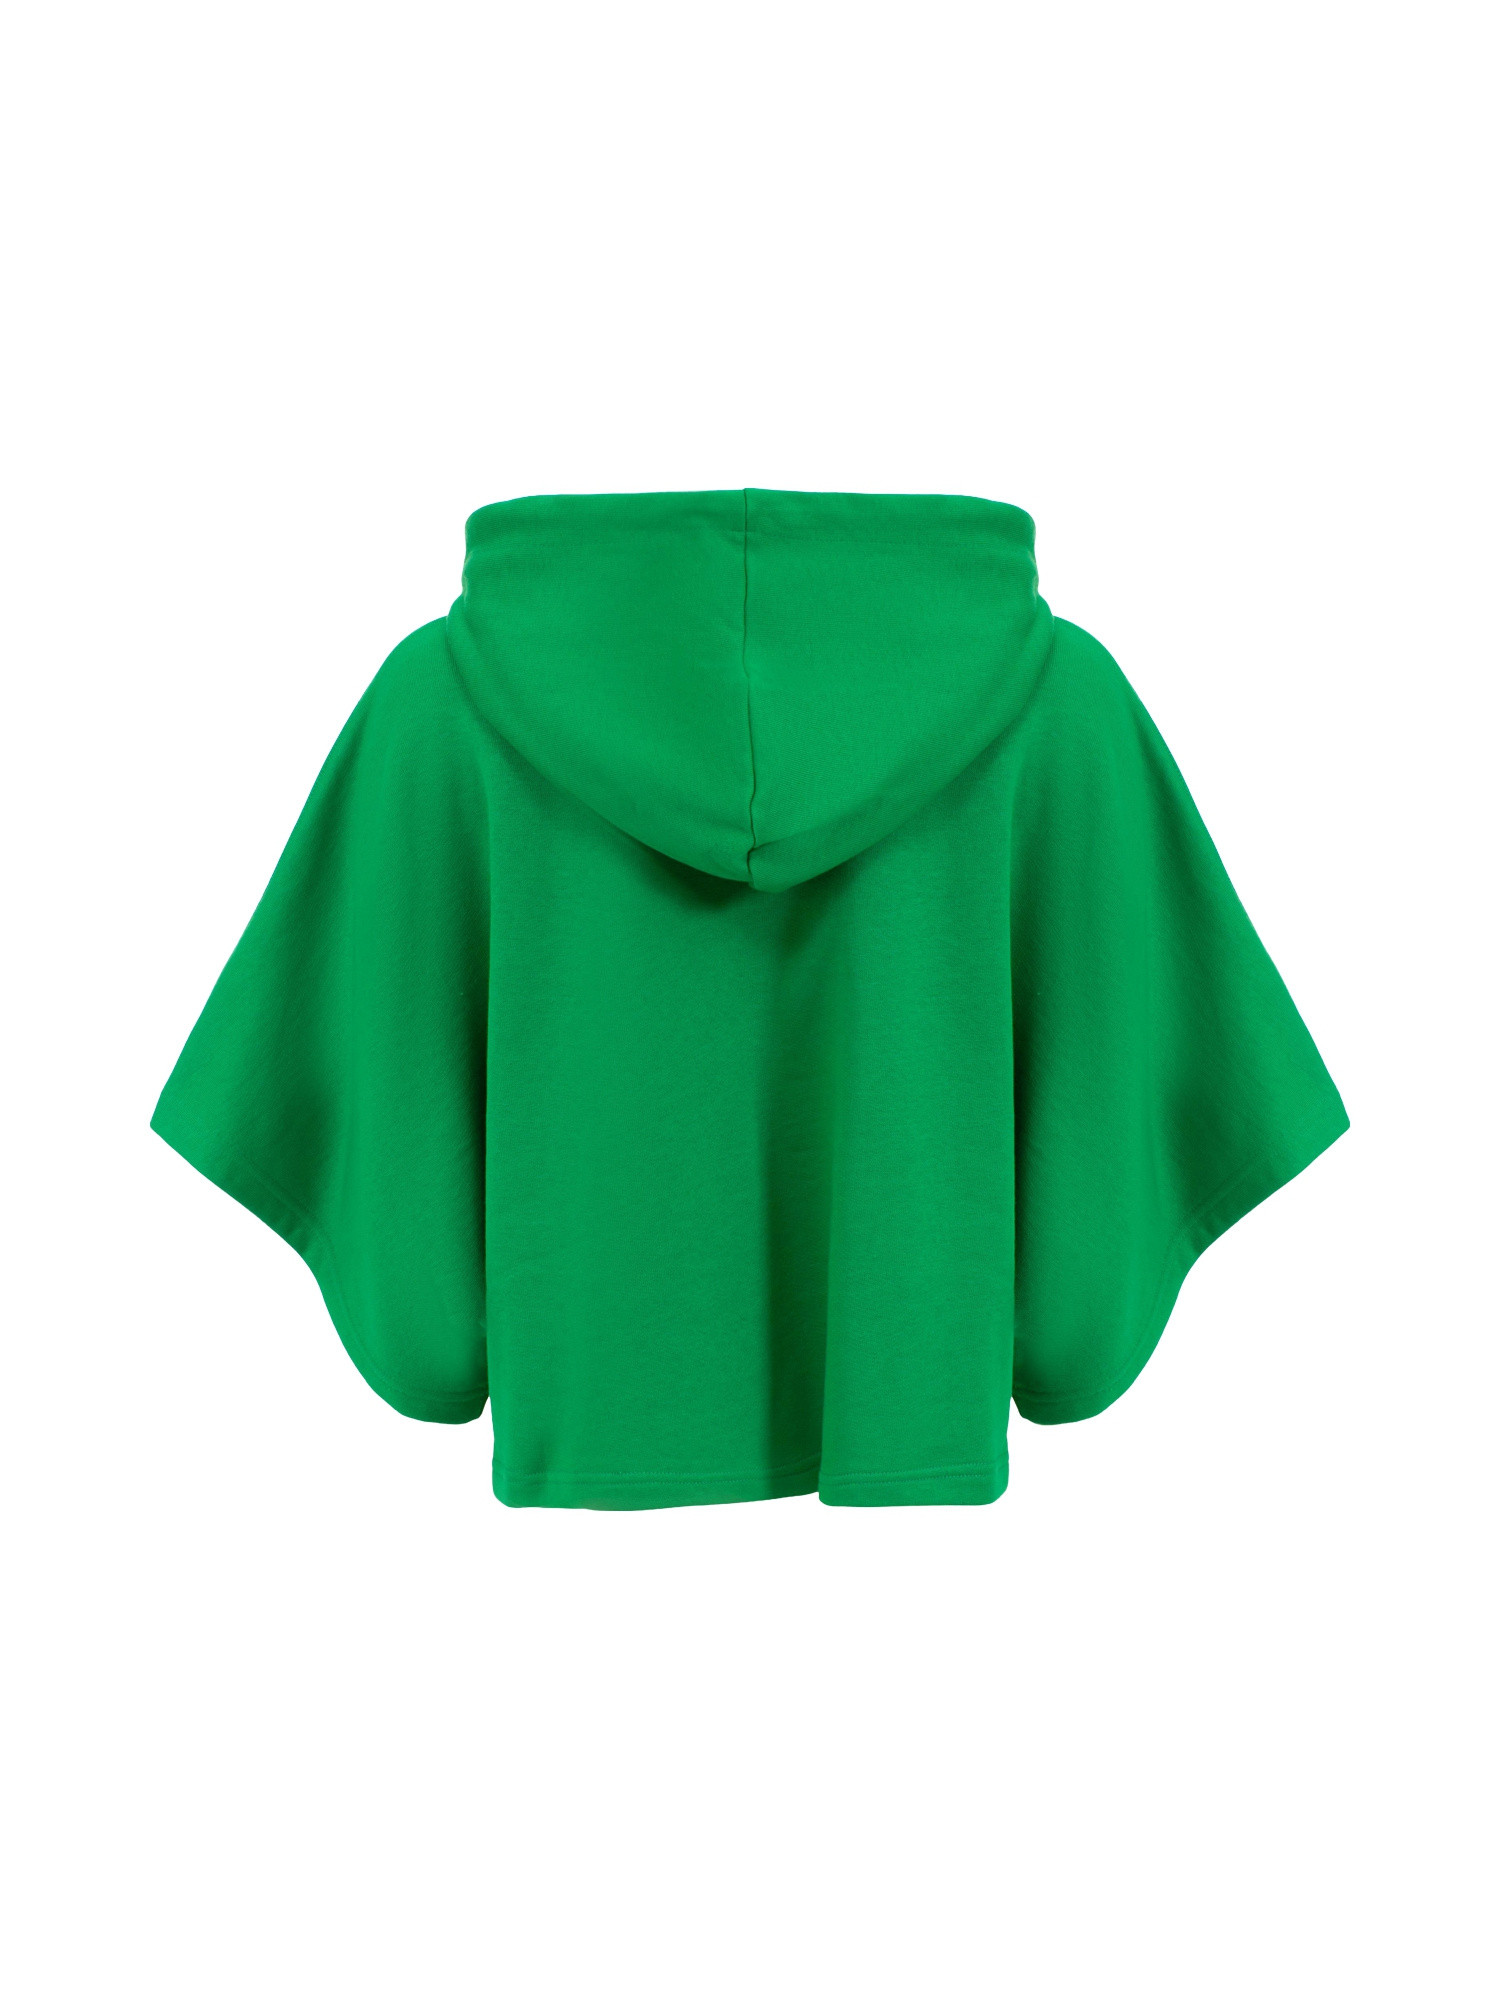 Chiara Ferragni - Sweatshirt with hood and Eye Star embroidery, Green, large image number 1